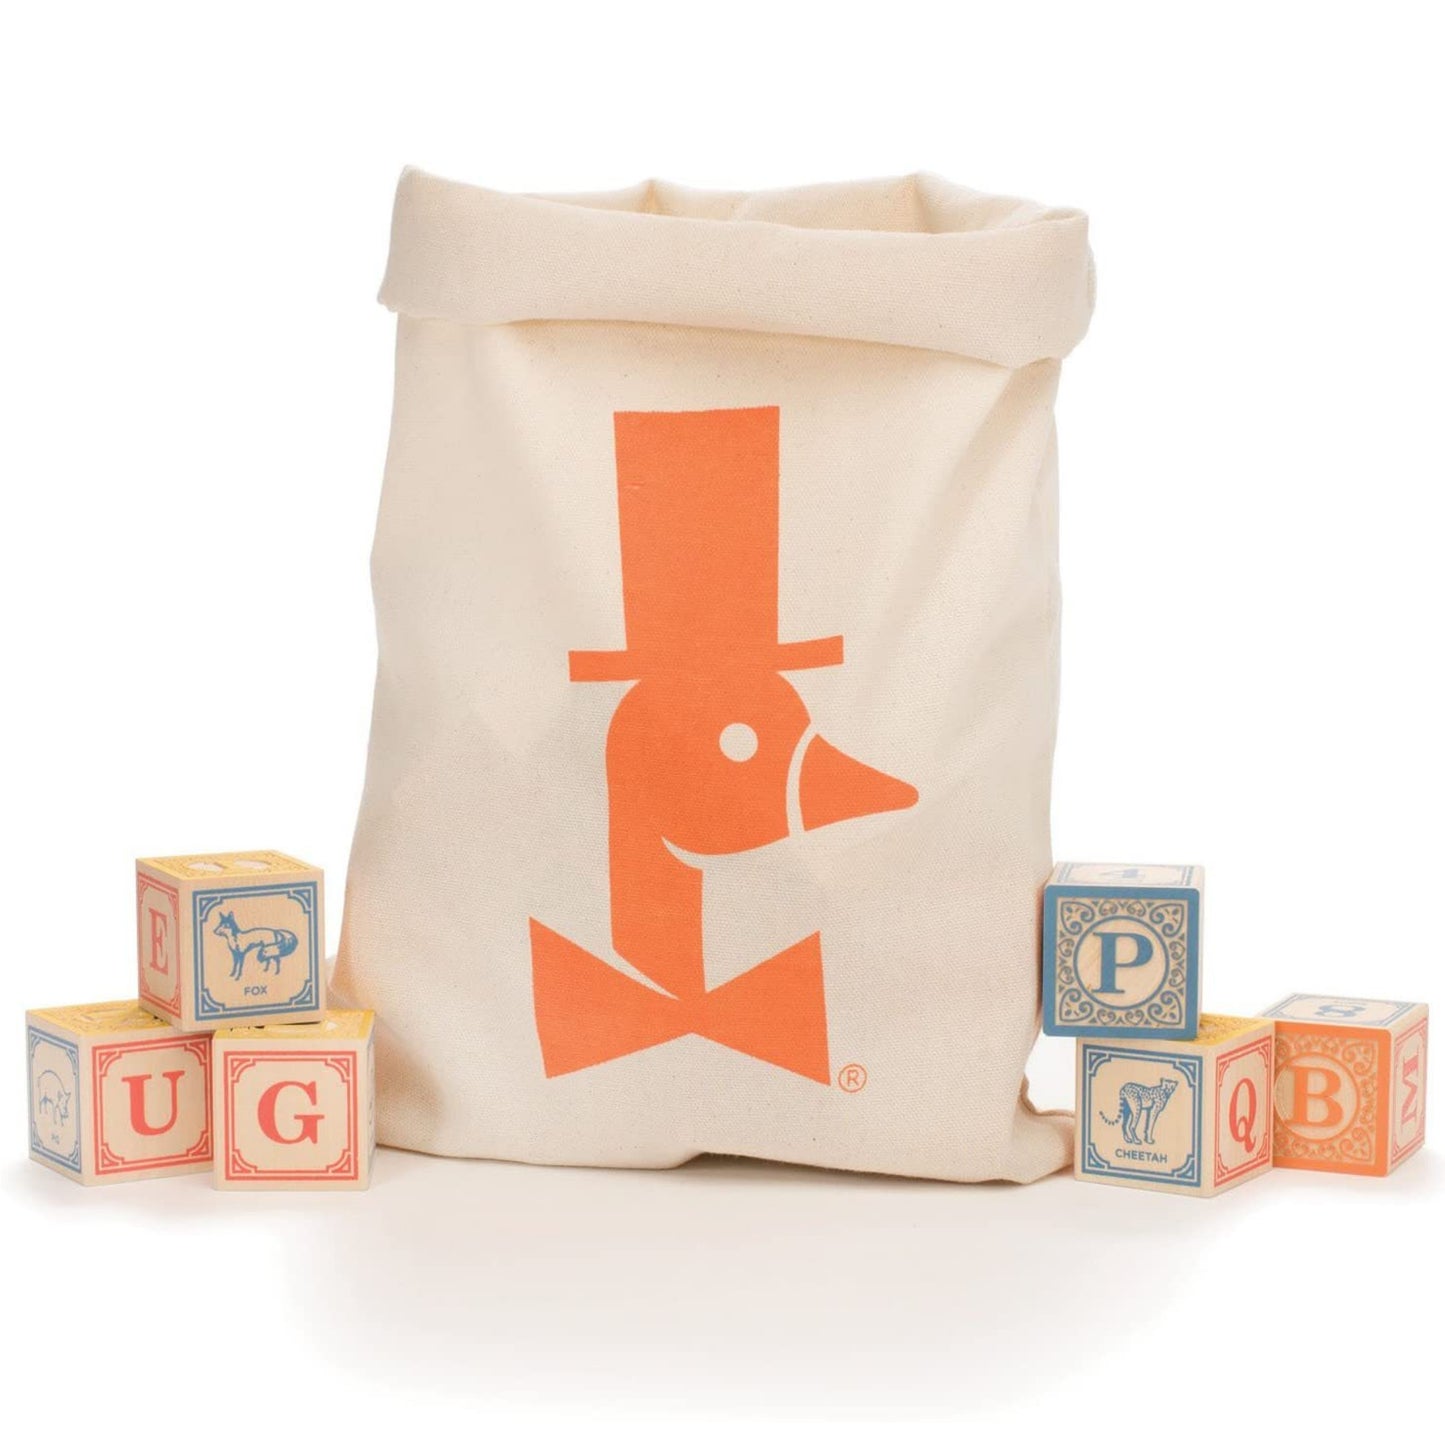 Classic ABC Wooden Blocks with Canvas Bag